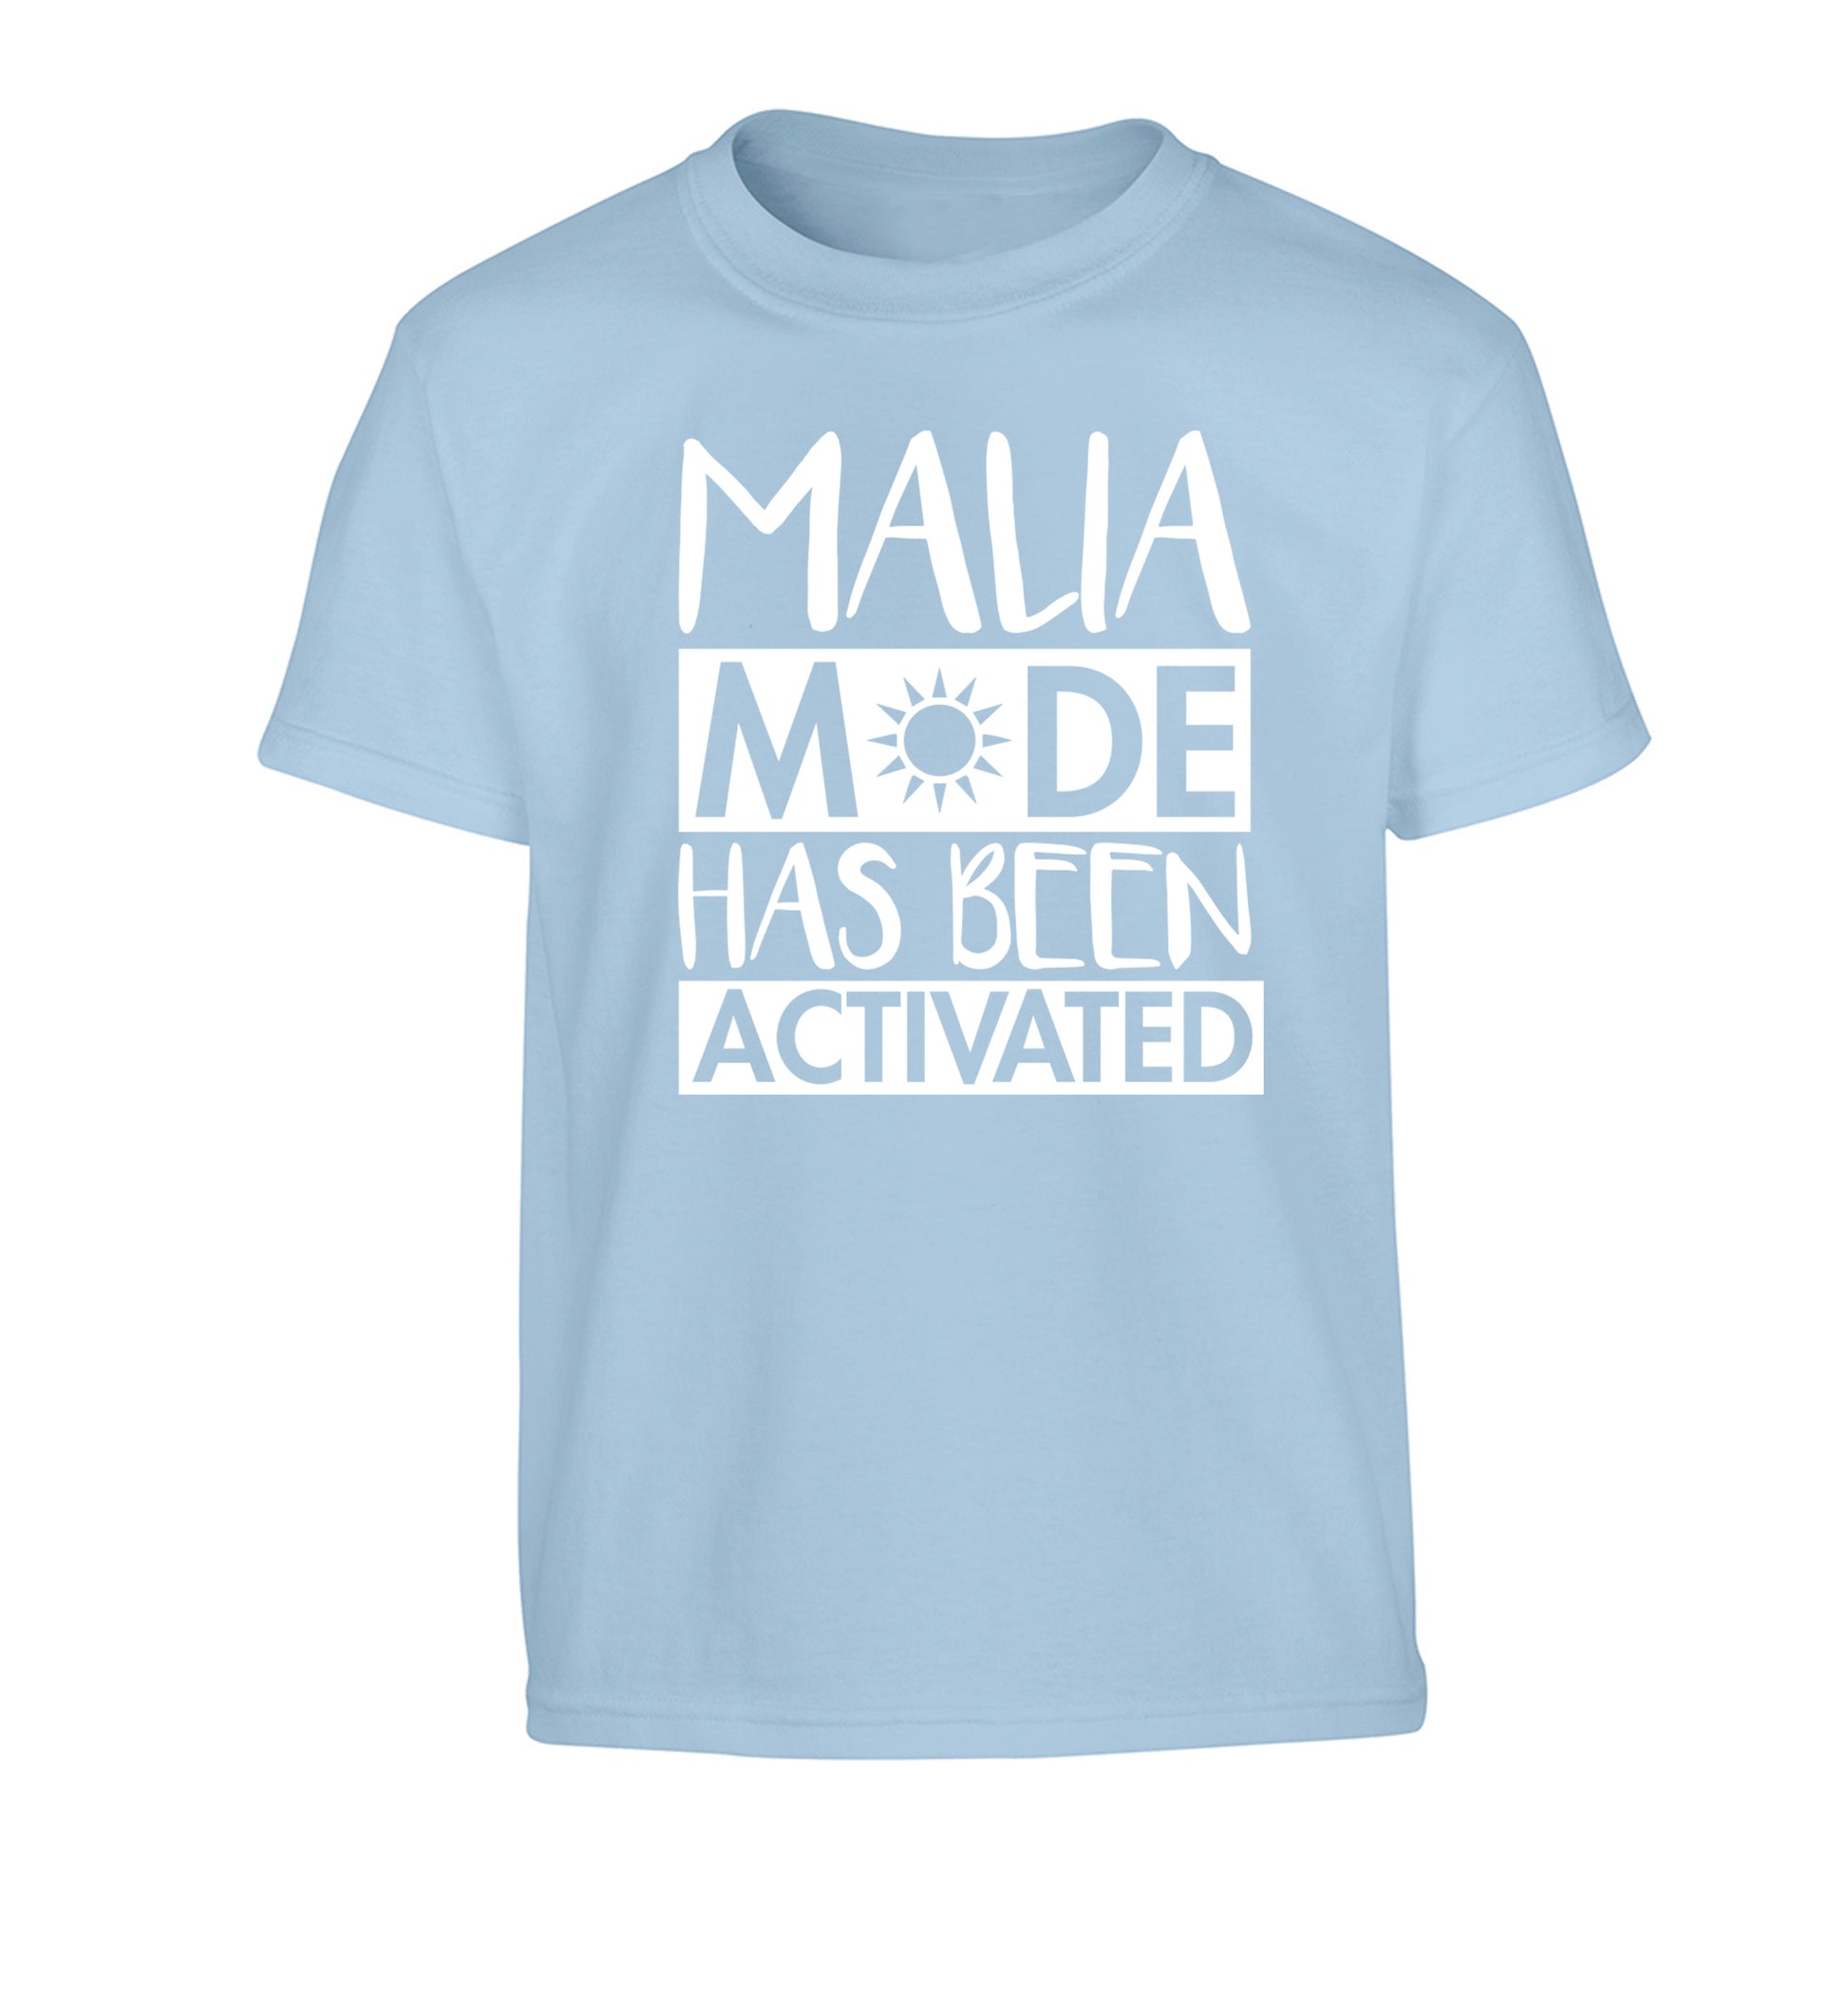 Malia mode has been activated Children's light blue Tshirt 12-13 Years